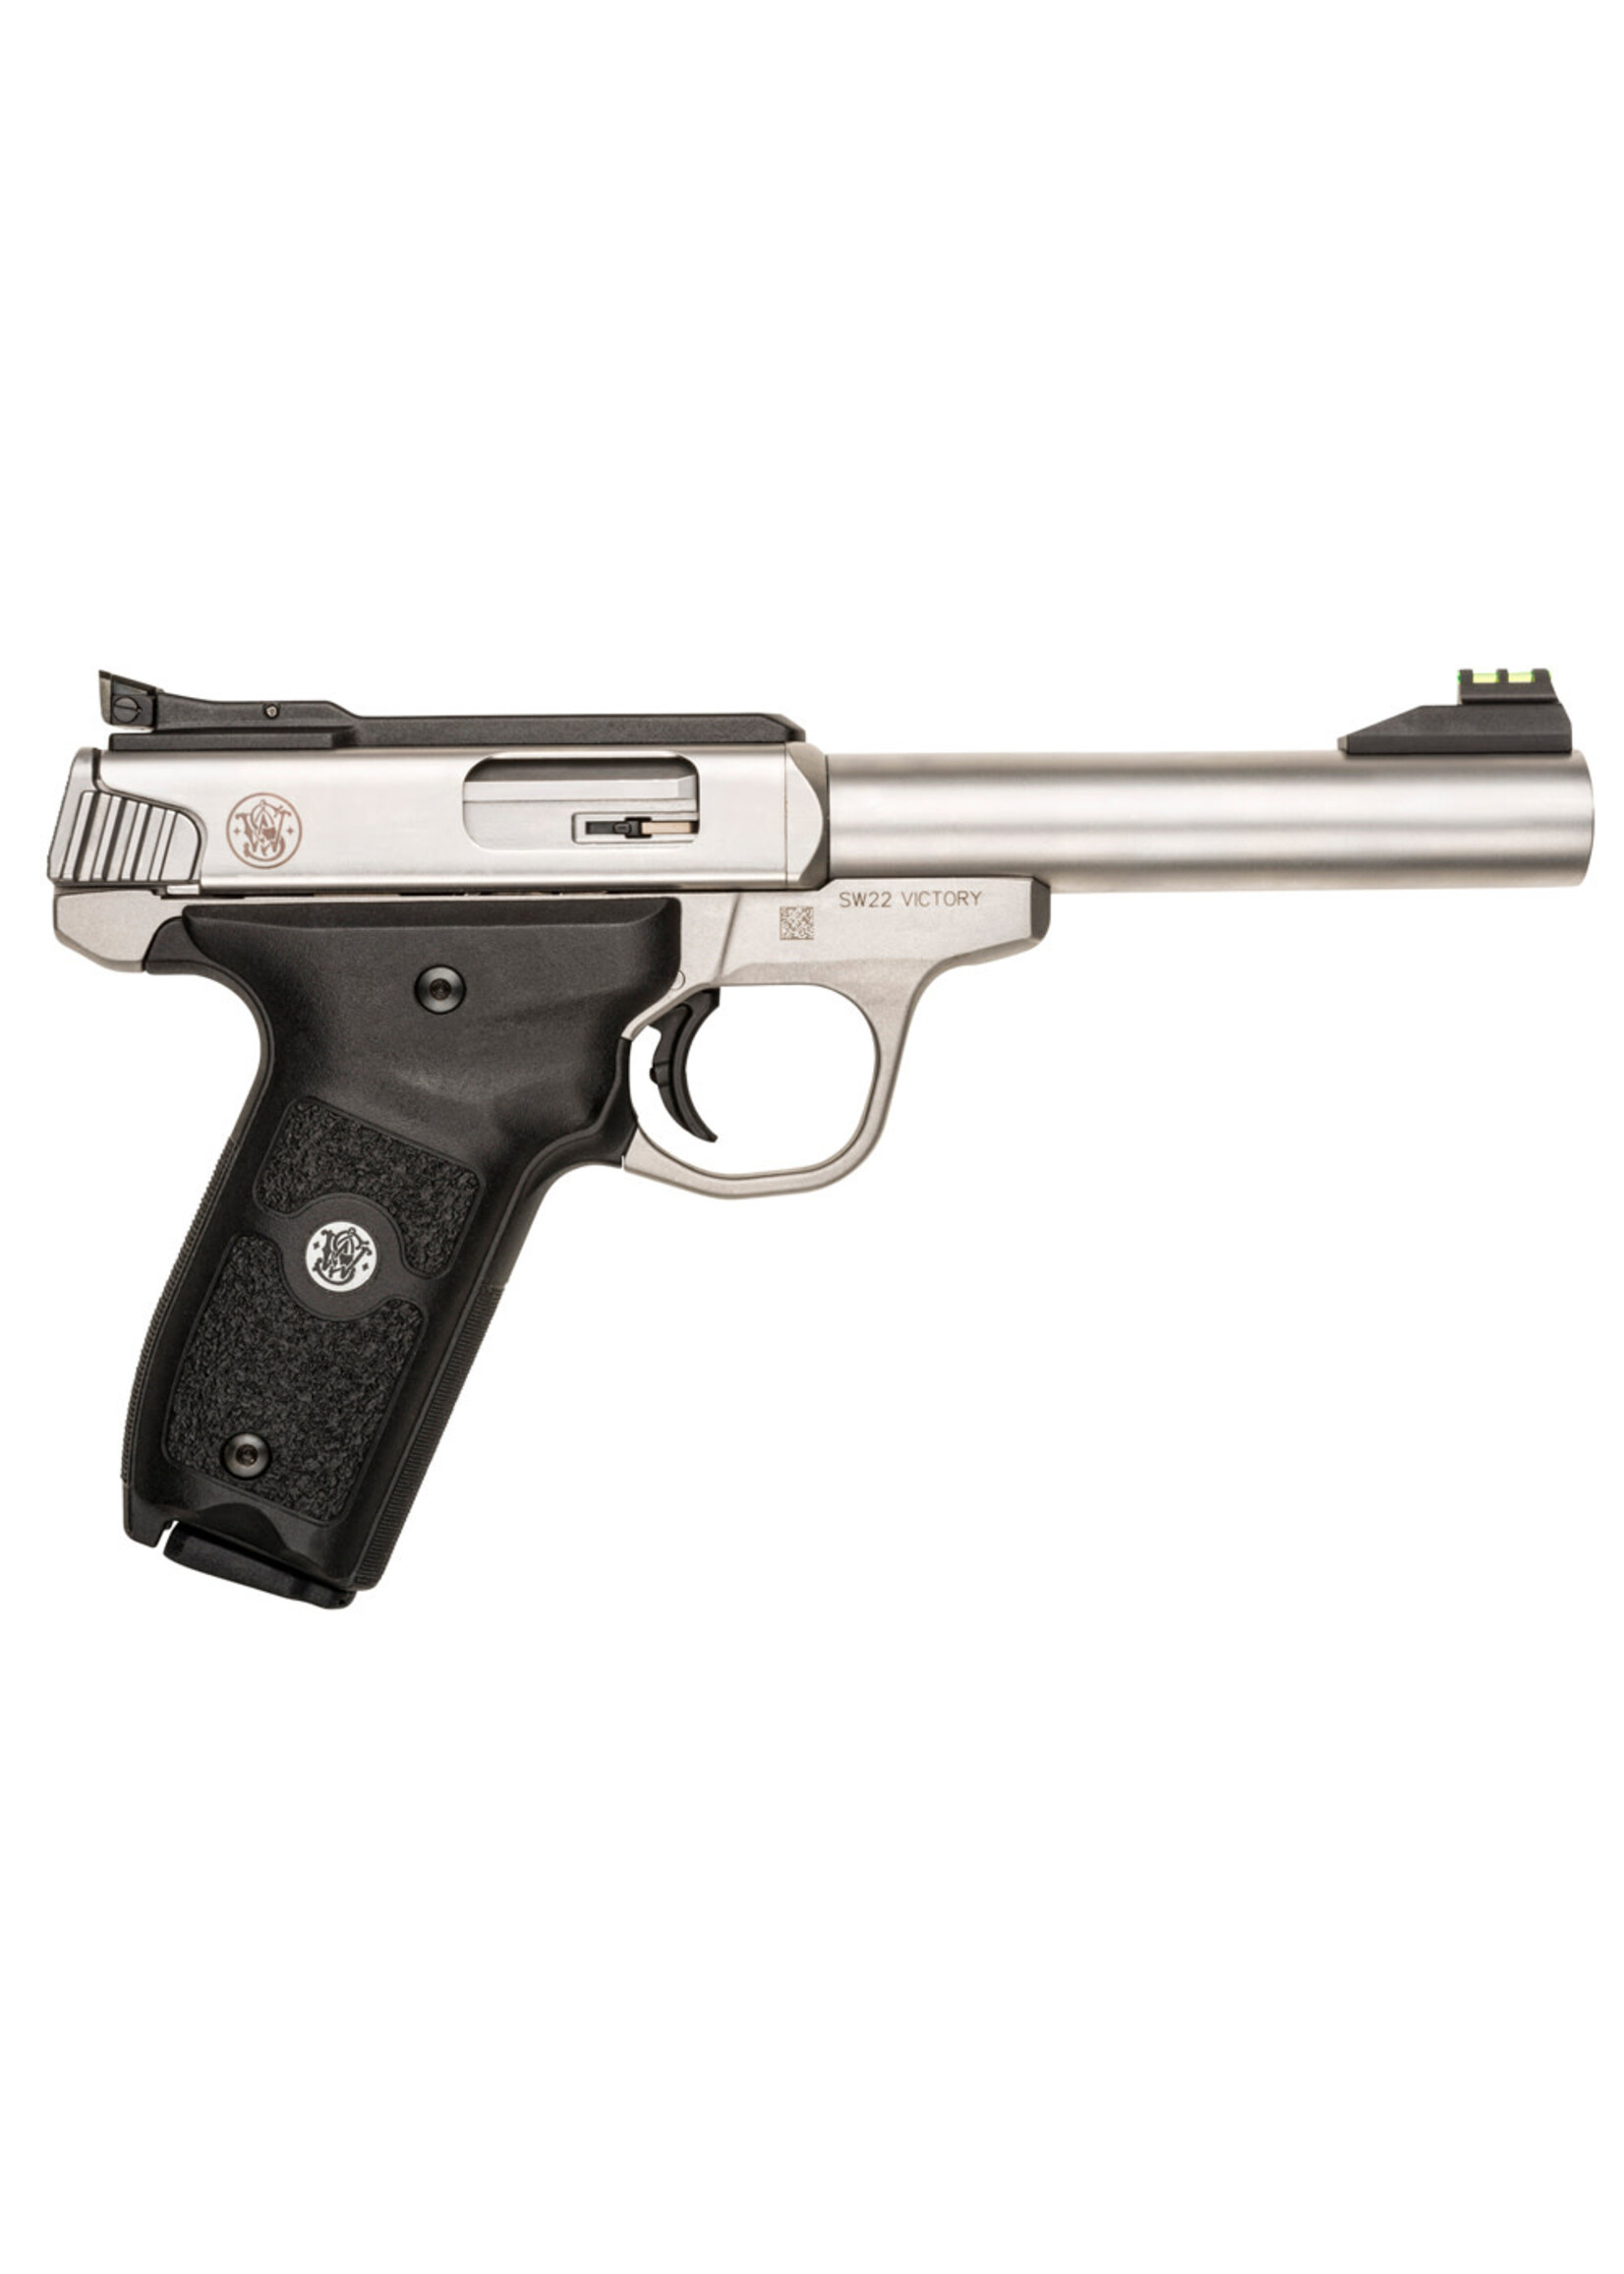 Smith and Wesson (S&W) Smith & Wesson 108490 SW22 Victory Full Size Frame 22 LR 10+1, 5.50" Silver Match Grade Barrel, Satin Serrated Slide & Frame, Black Textured Grip, Thumb Safety, Right Hand